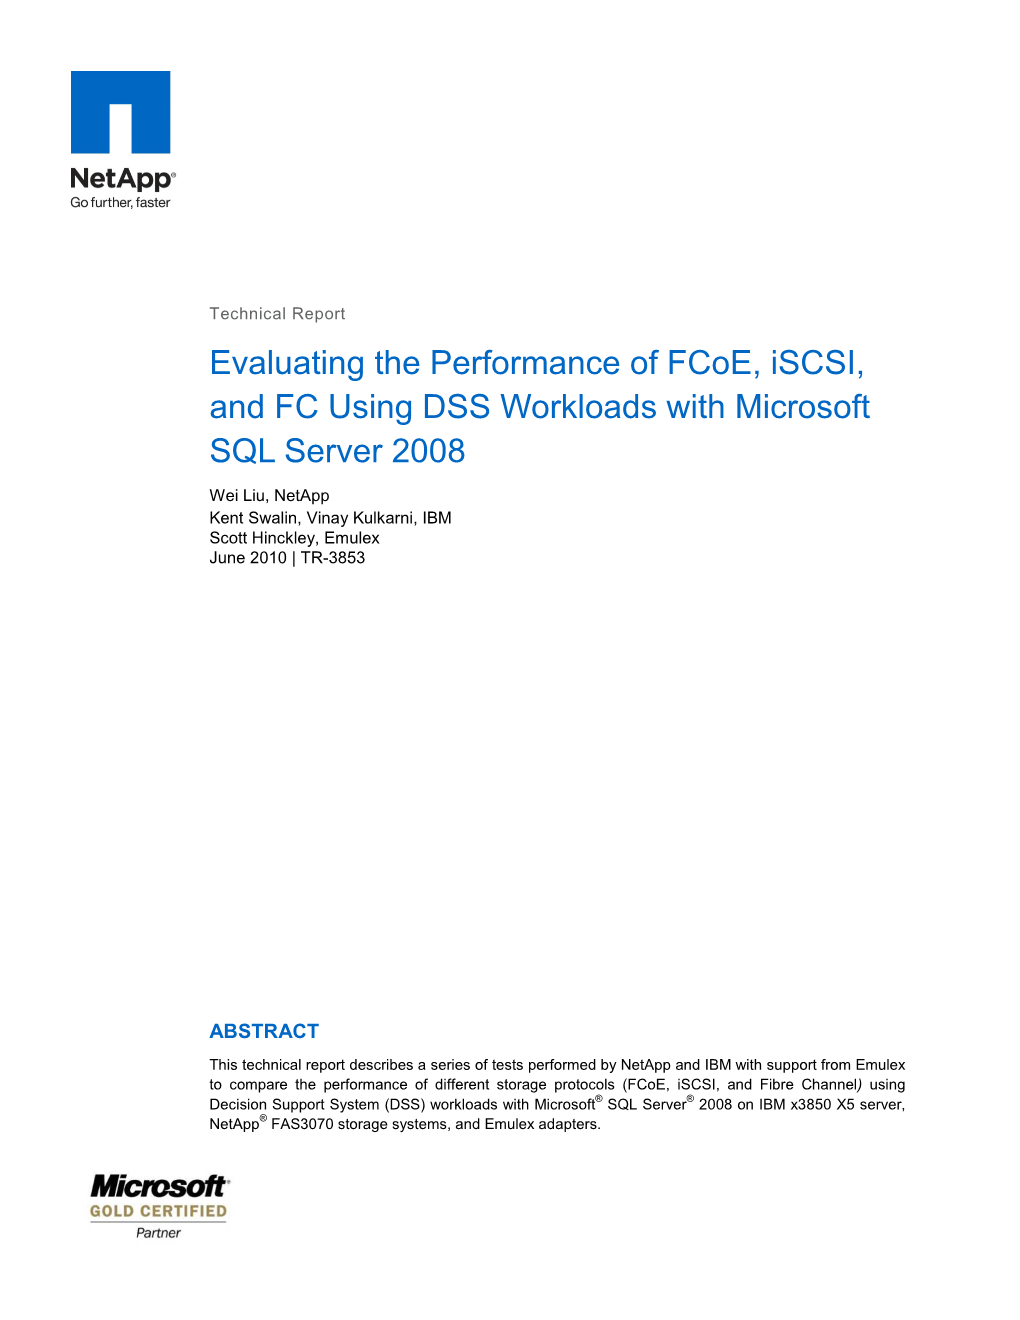 Microsoft SQL Server 2008 DSS Performance with Fcoe, Iscsi, And